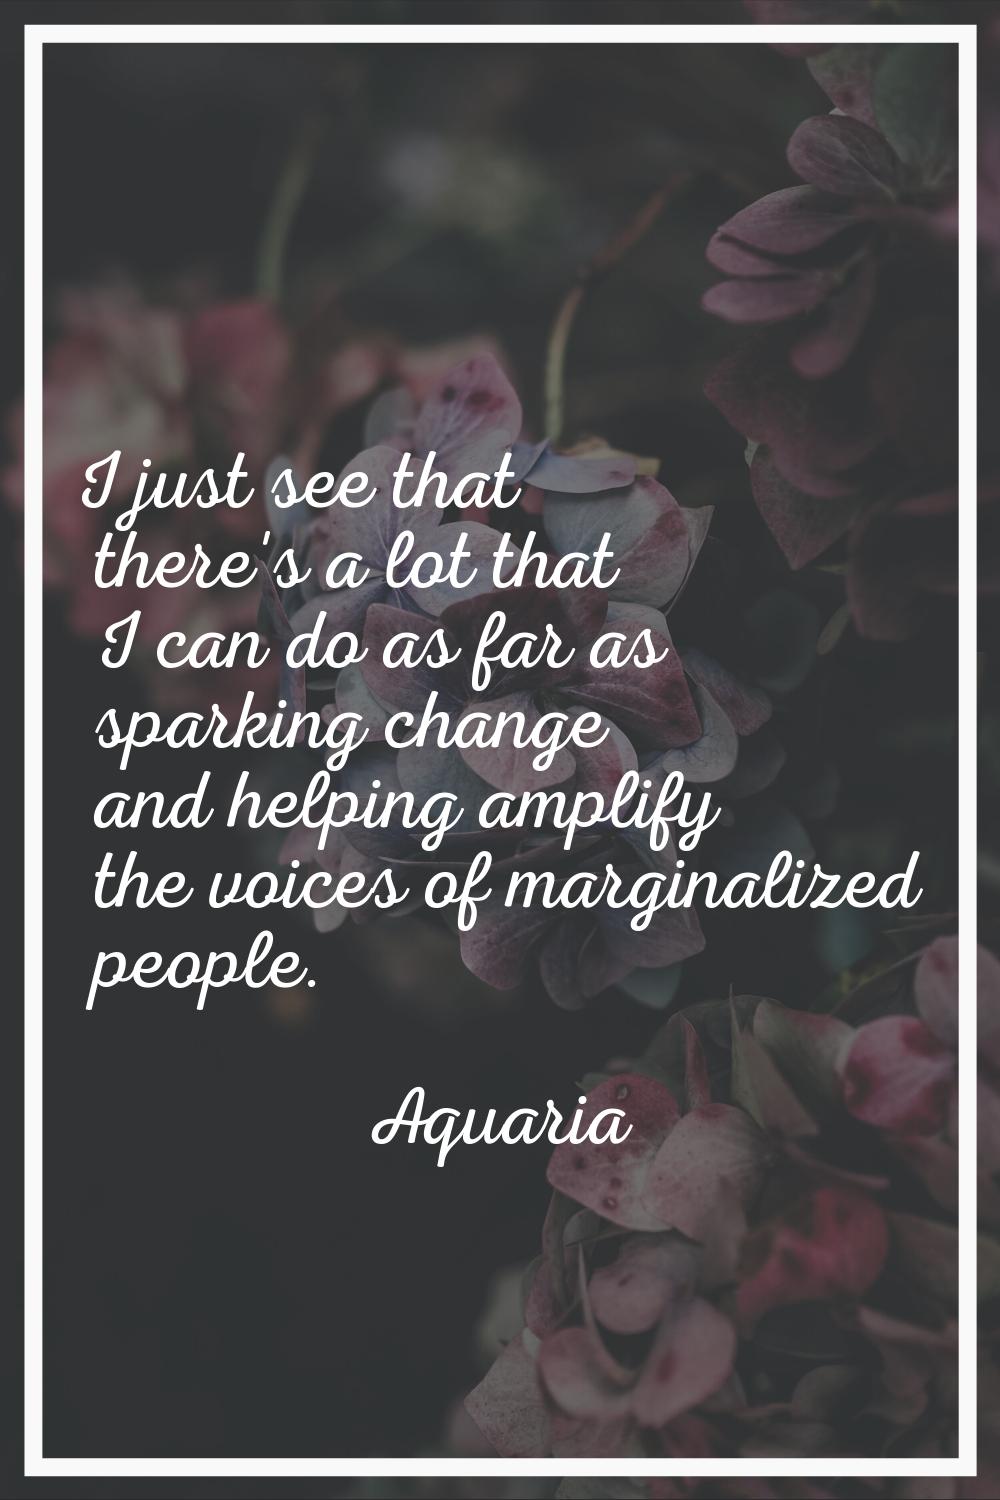 I just see that there's a lot that I can do as far as sparking change and helping amplify the voice